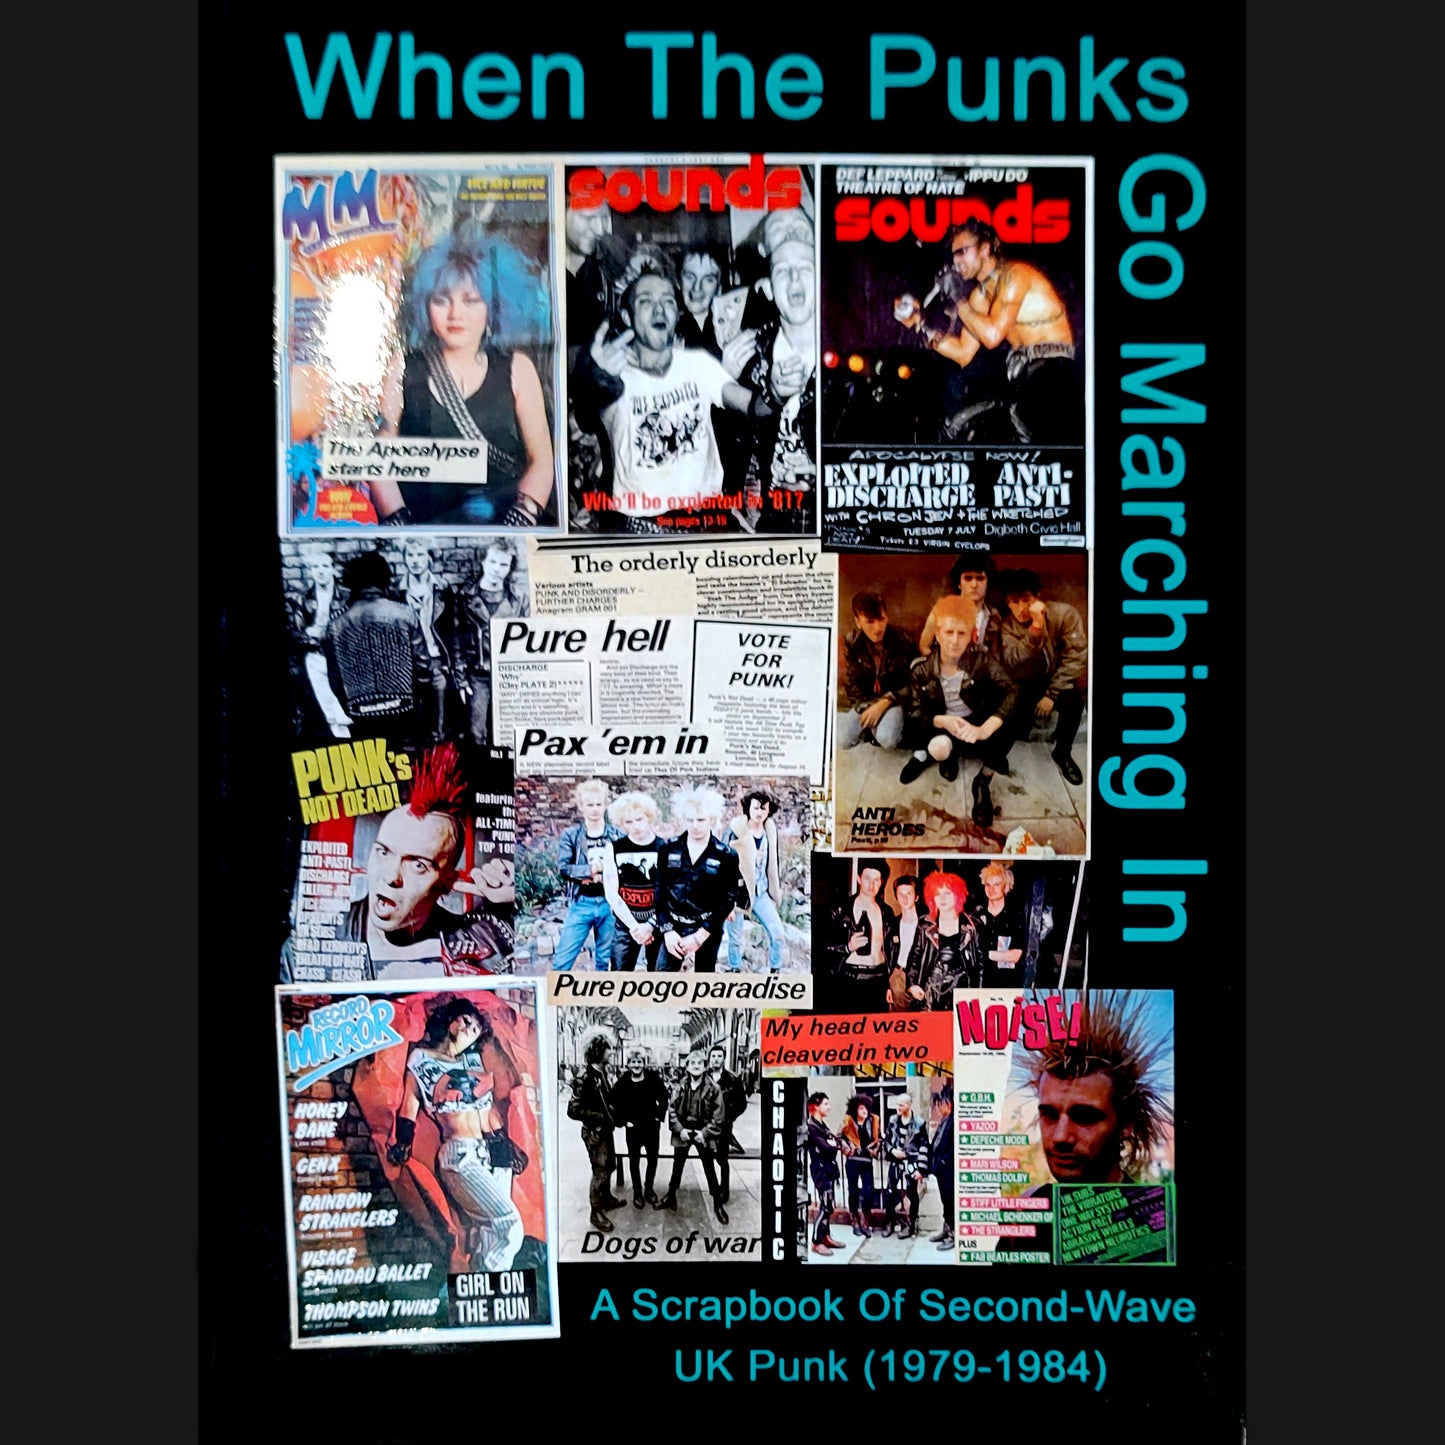 "WHEN THE PUNKS GO MARCHING IN: A SCRAPBOOK OF SECOND WAVE UK PUNK 1979-1984" BOOK